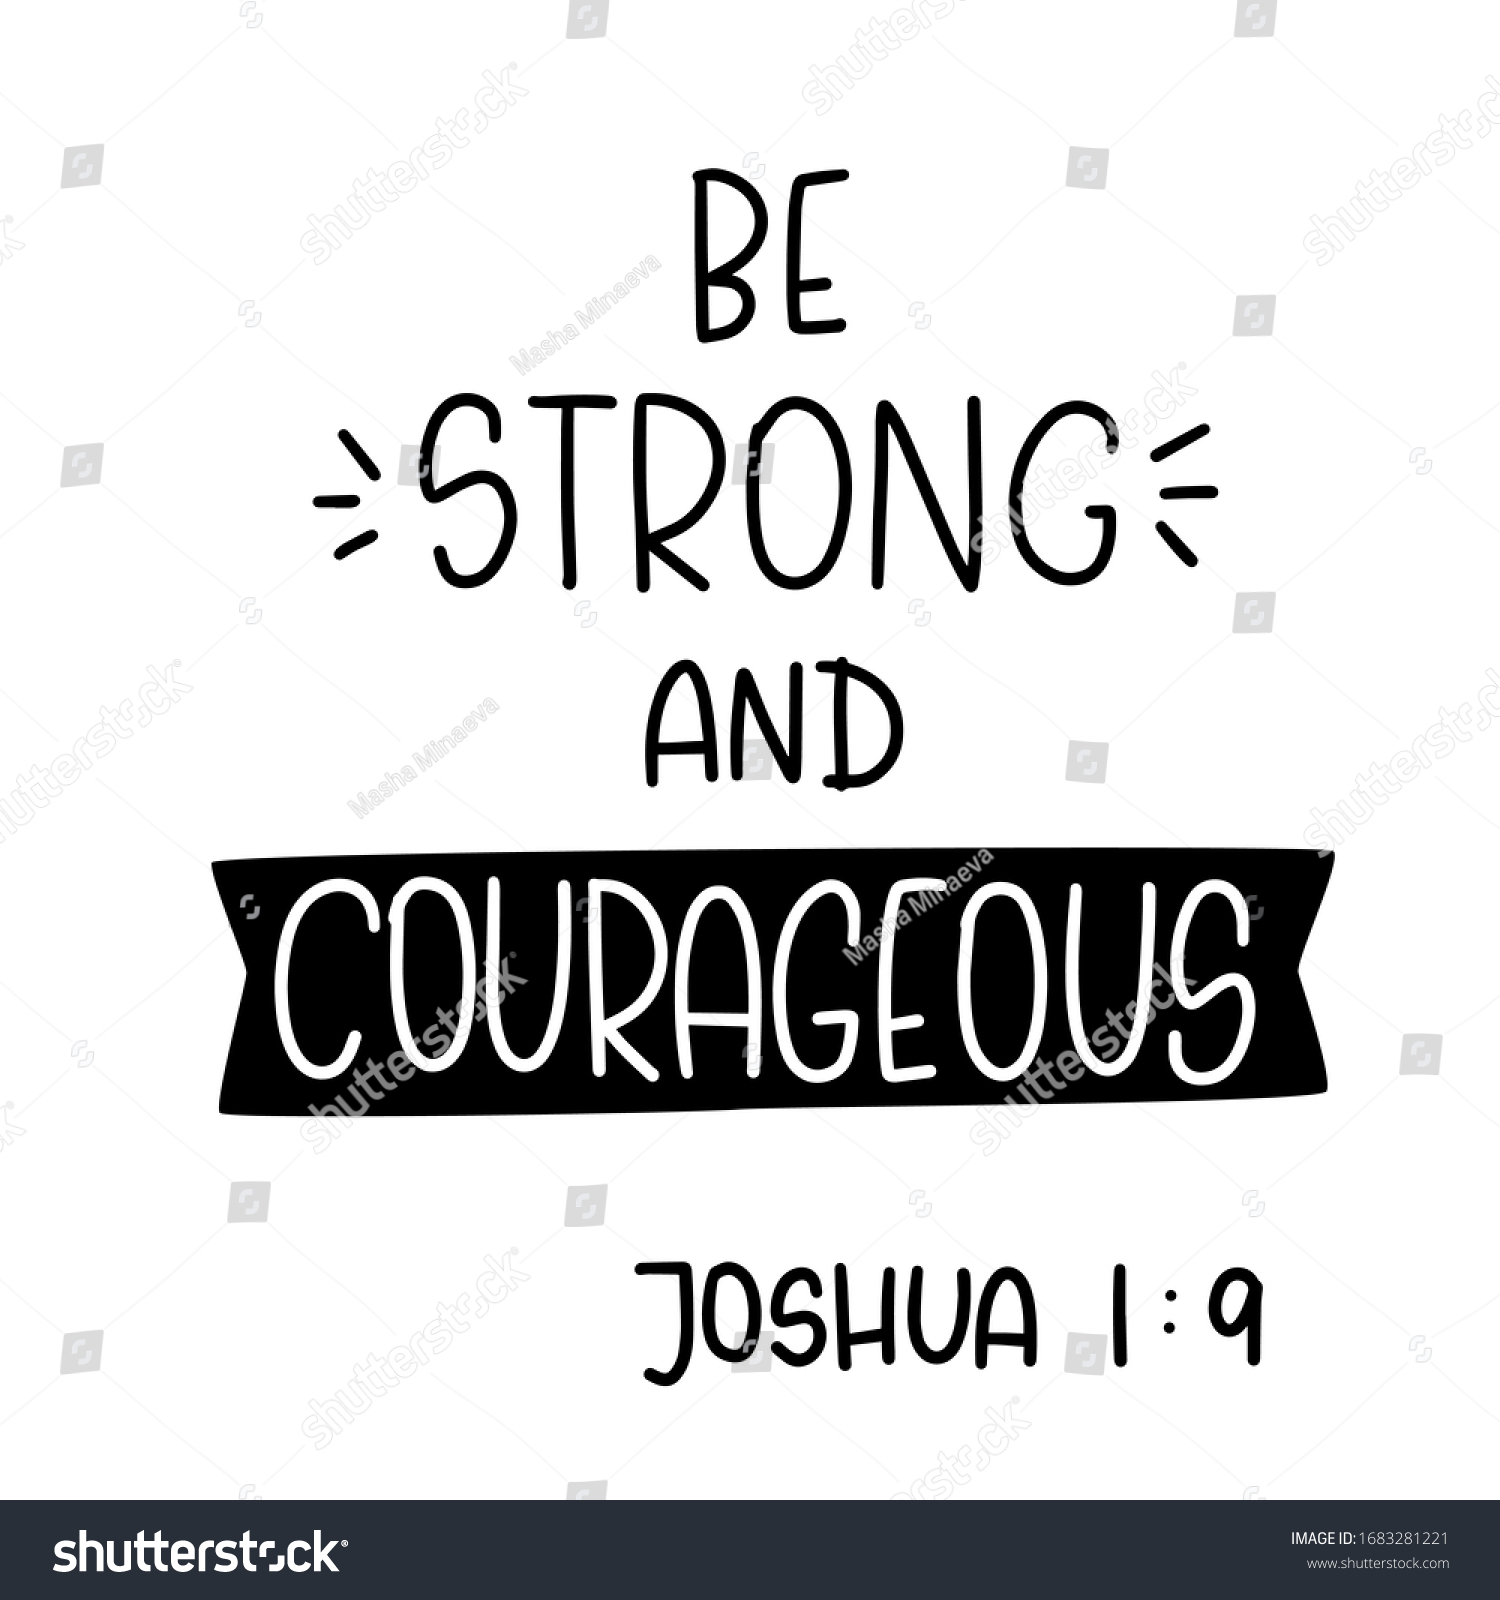 SVG of Joshua 1:9 Be strong and courageous handwritten lettering Bible quote. Short saying about people’s power out of a Christian religious book.  svg